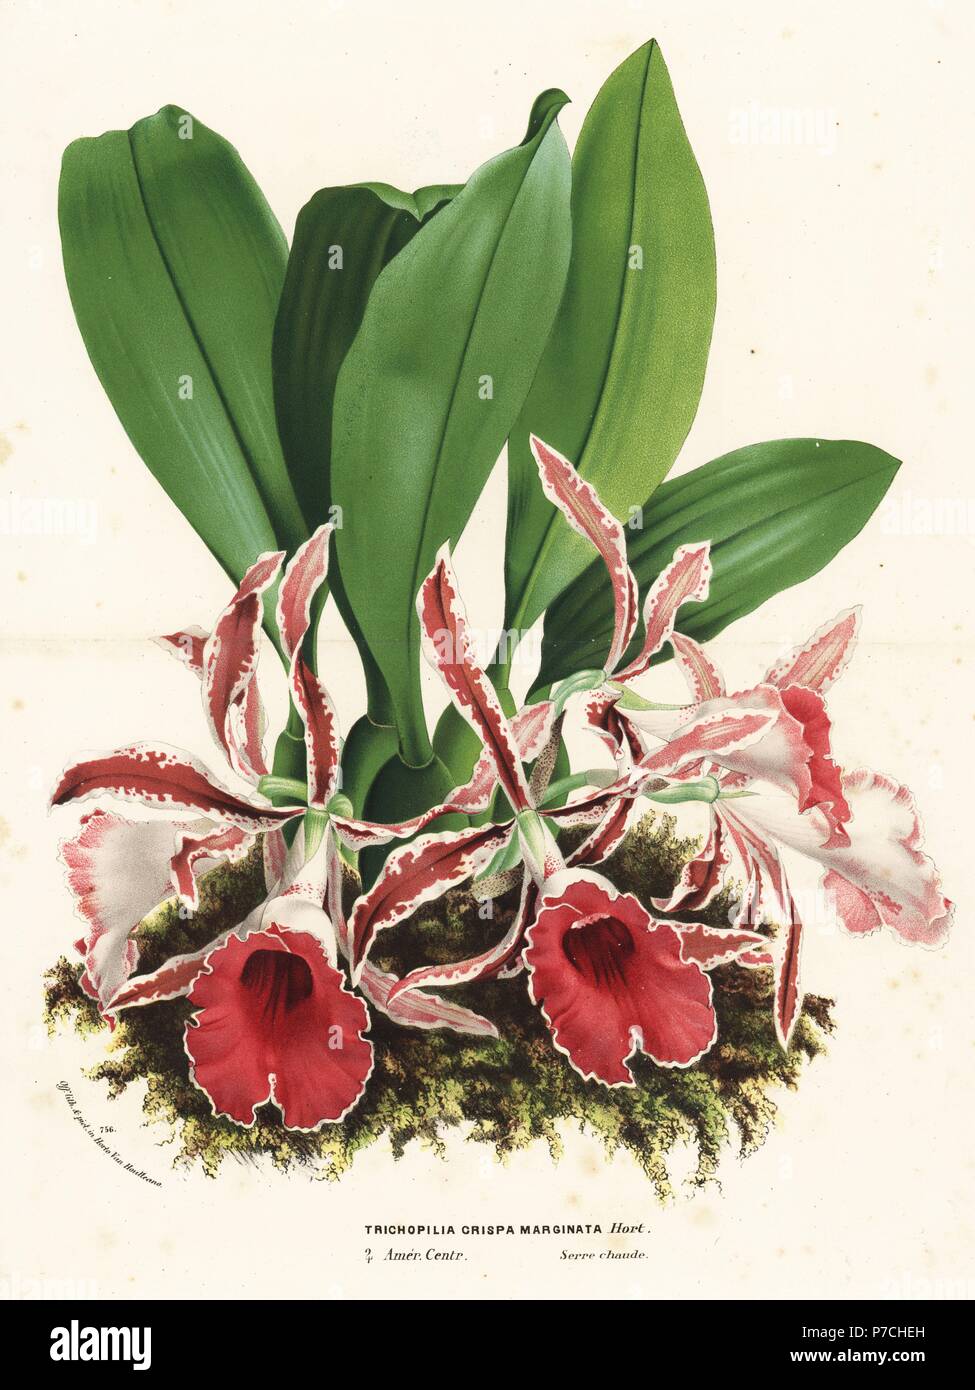 Rimmed trichopilia orchid, Trichopilia marginata (Trichopilia crispa marginata). Handcoloured lithograph from Louis van Houtte and Charles Lemaire's Flowers of the Gardens and Hothouses of Europe, Flore des Serres et des Jardins de l'Europe, Ghent, Belgium, 1870. Stock Photo